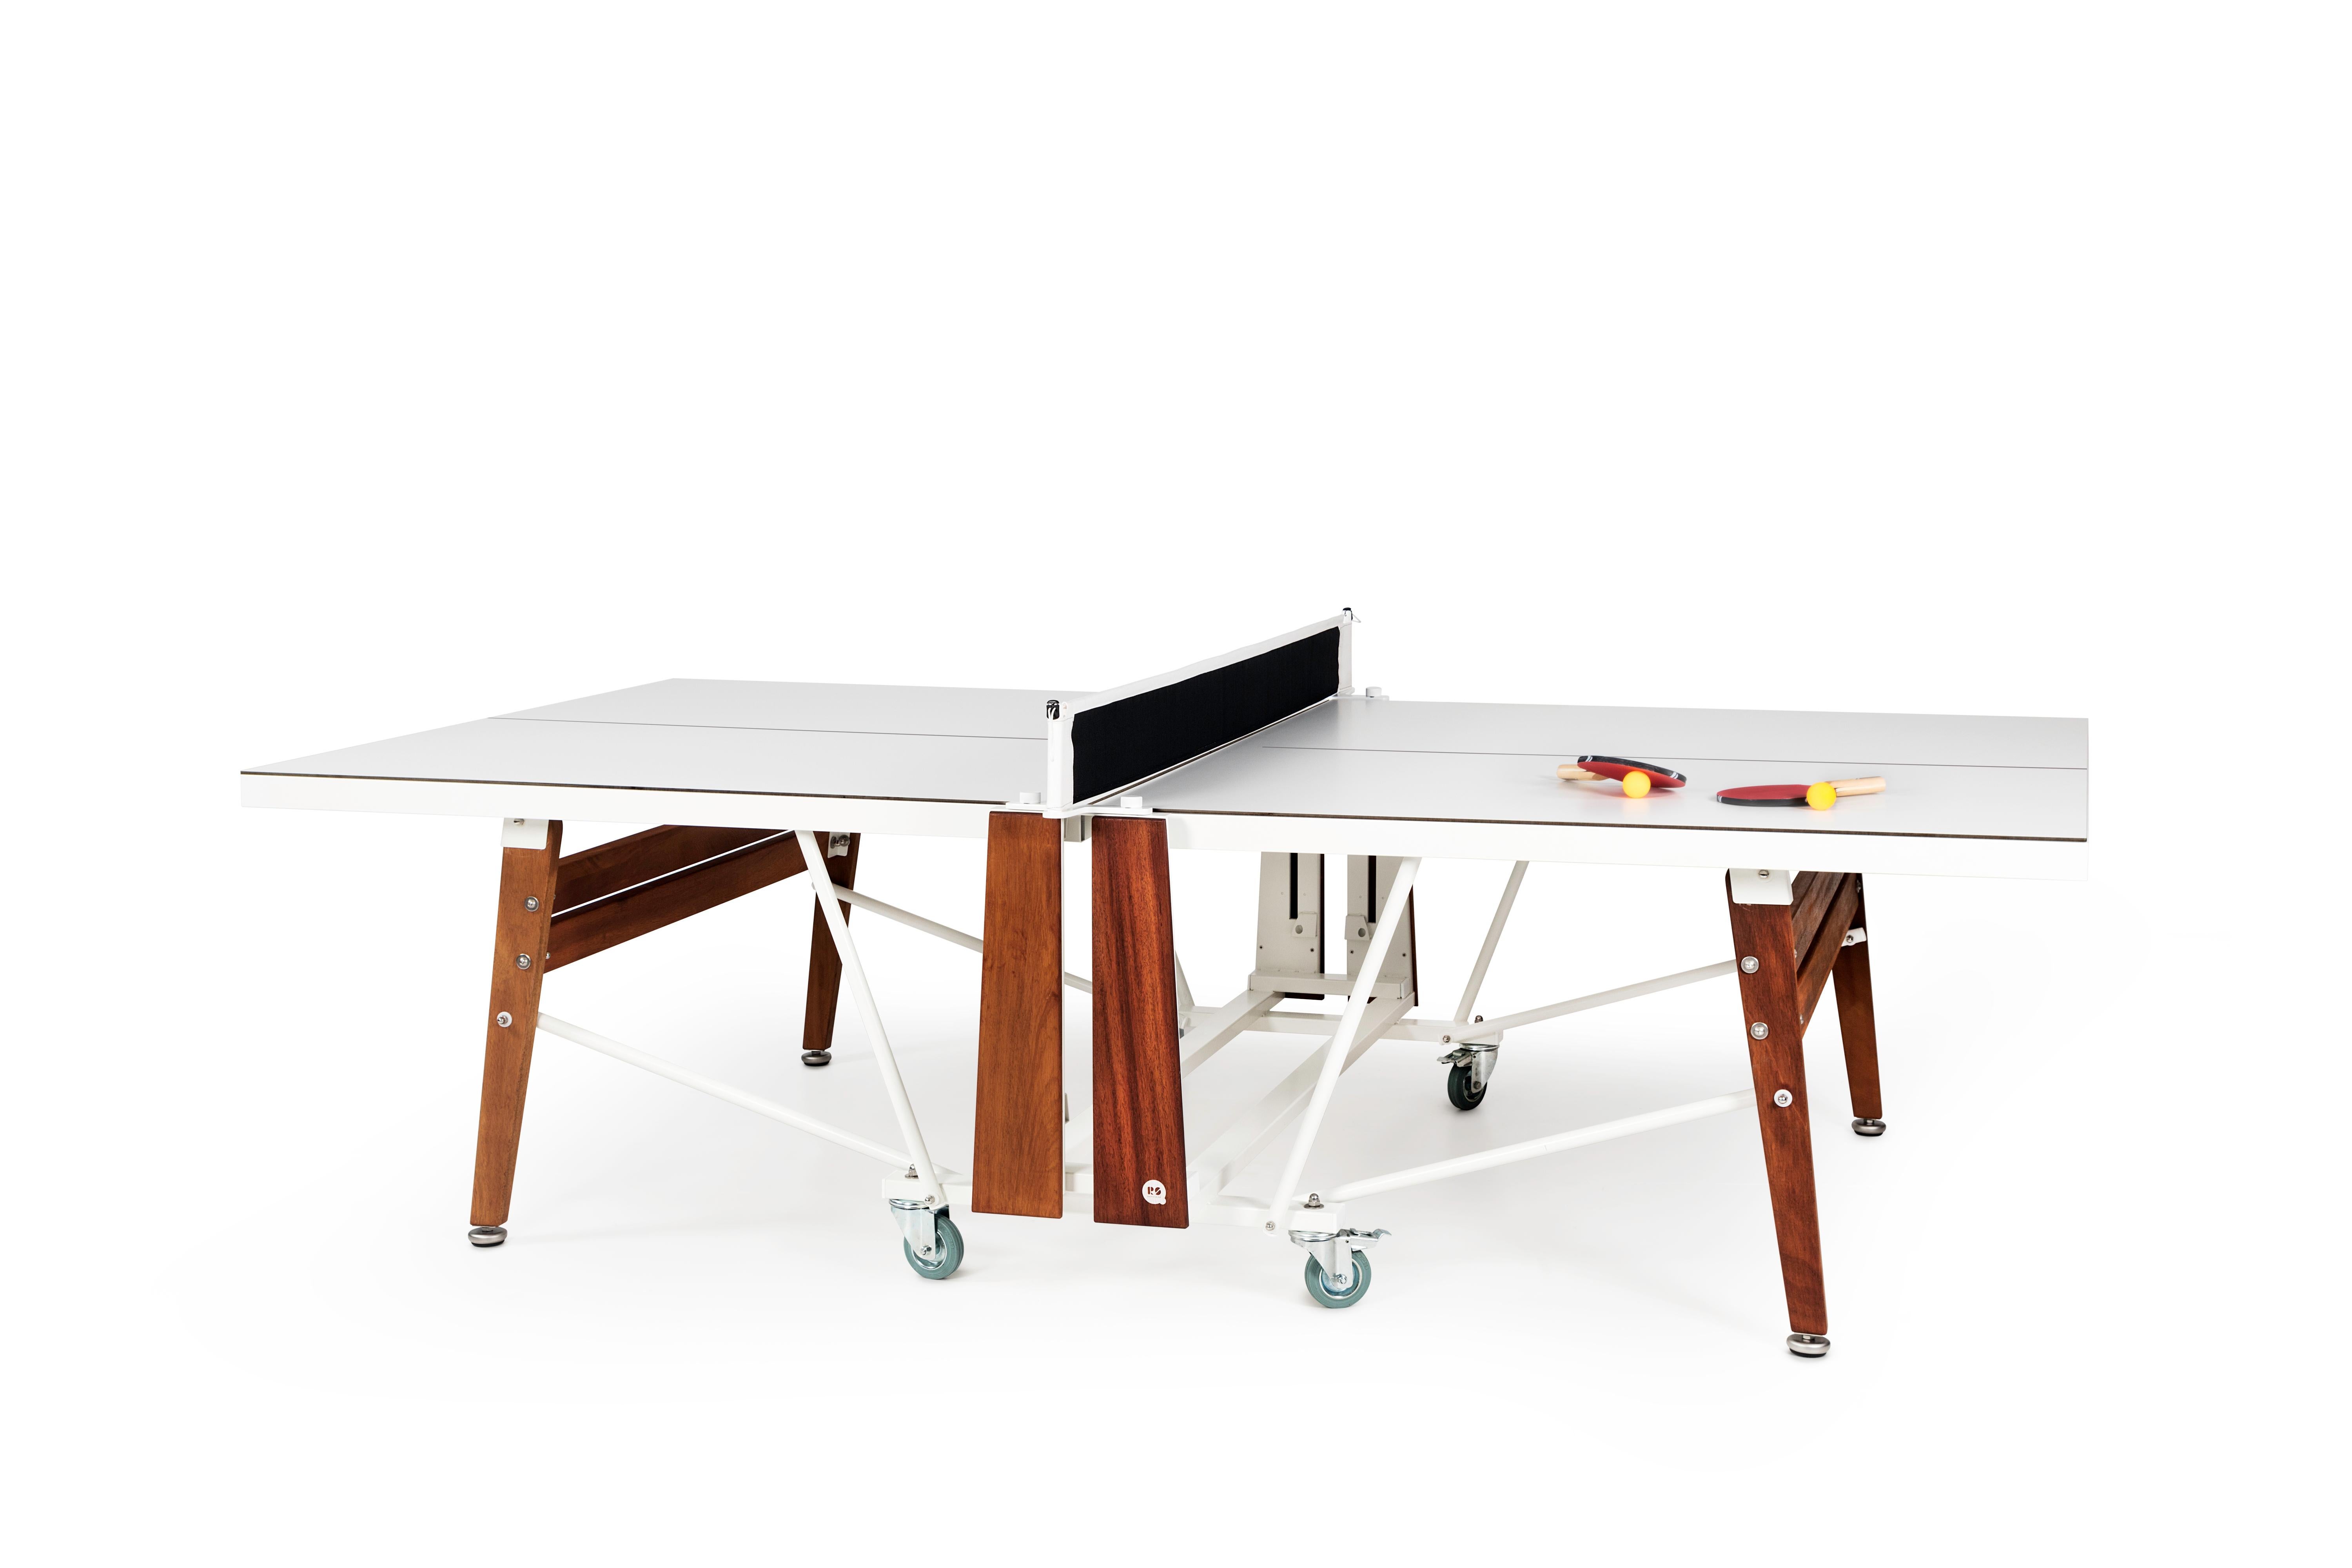 The RS Ping-Pong folding table is a new folding table concept. It restores its design to its rightful place and combines the functionality of a folding ping-pong table with the signature design of RS-Barcelona products. The RS Ping-Pong folding is